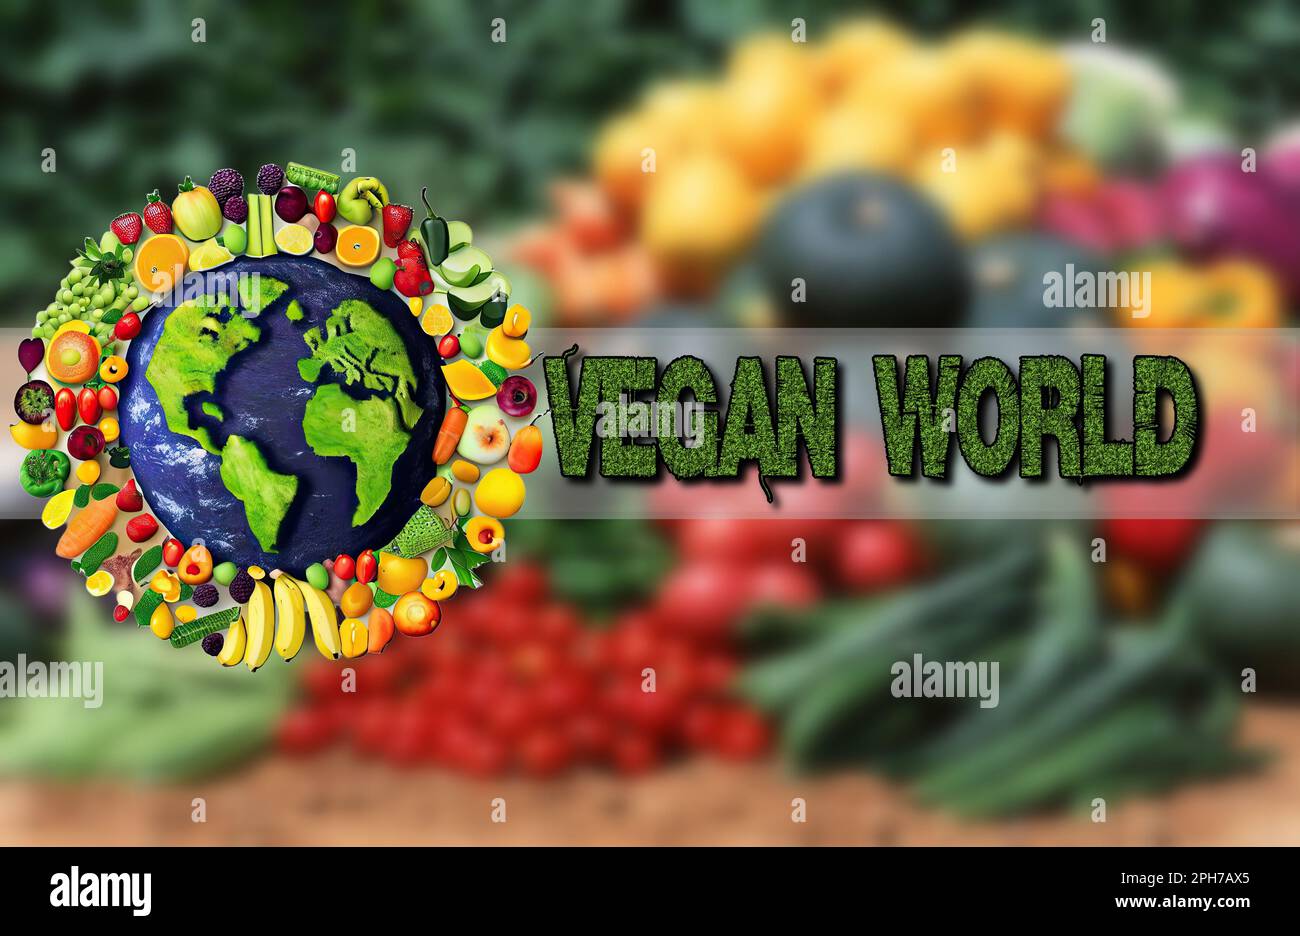 Vegan World - An image that represents a terrestrial globe made up of fruit and vegetables immersed in a green and eco-sustainable environment Stock Photo